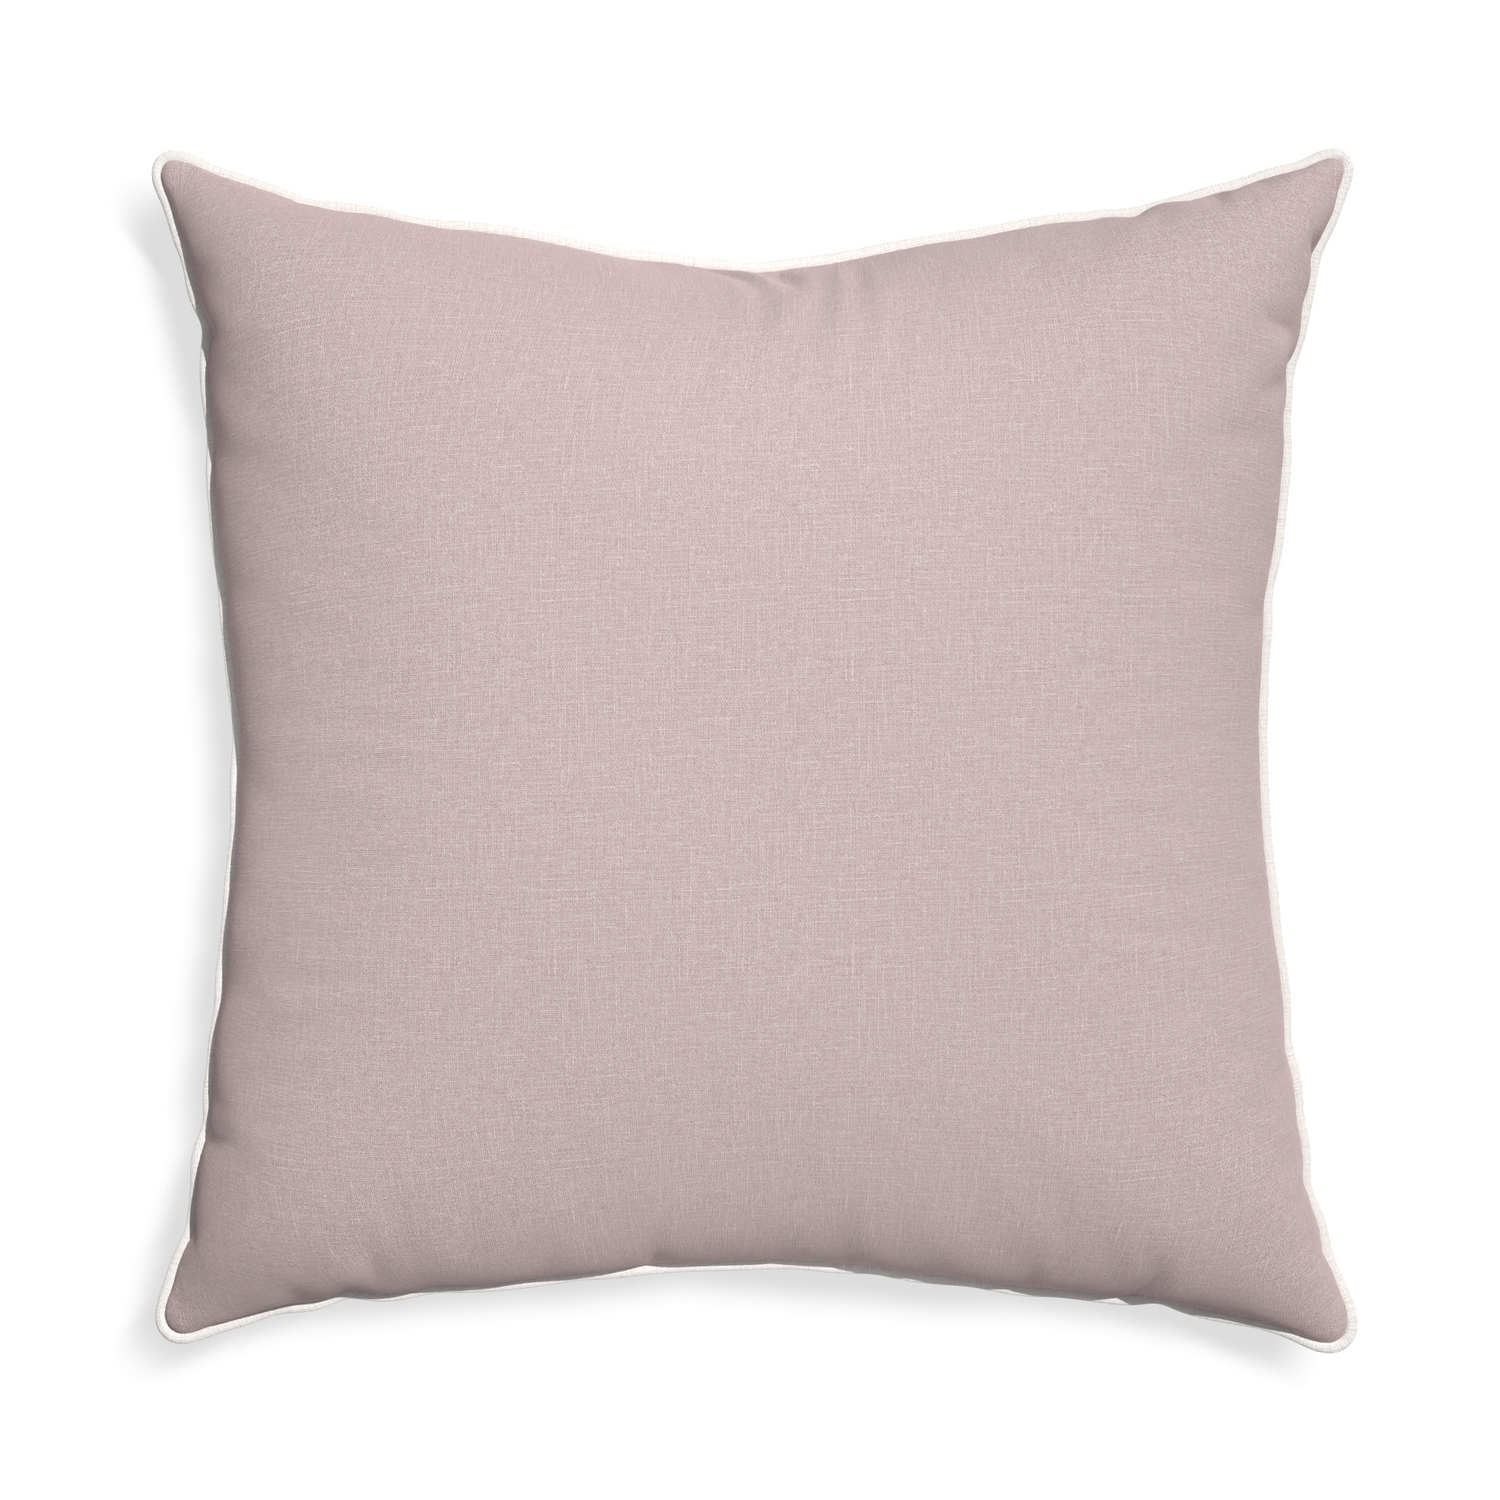 Euro-sham orchid custom mauve pinkpillow with snow piping on white background